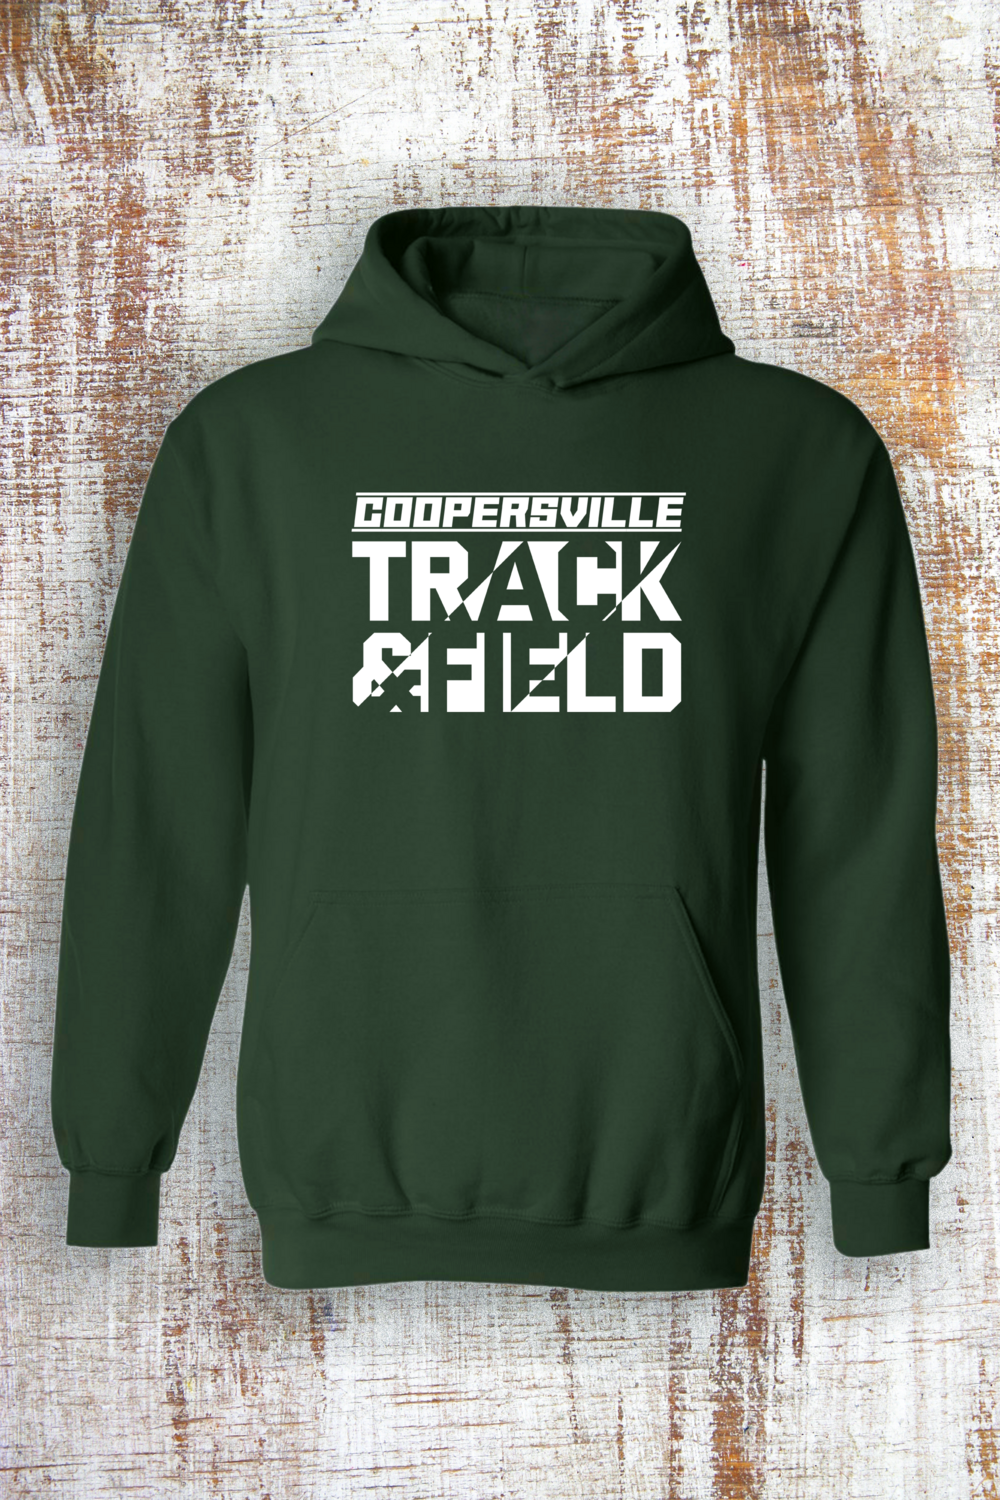 Broncos Track and Field Sweatshirt - hooded and crew, Color: Forest Green, Sweatshirt Style: Hooded